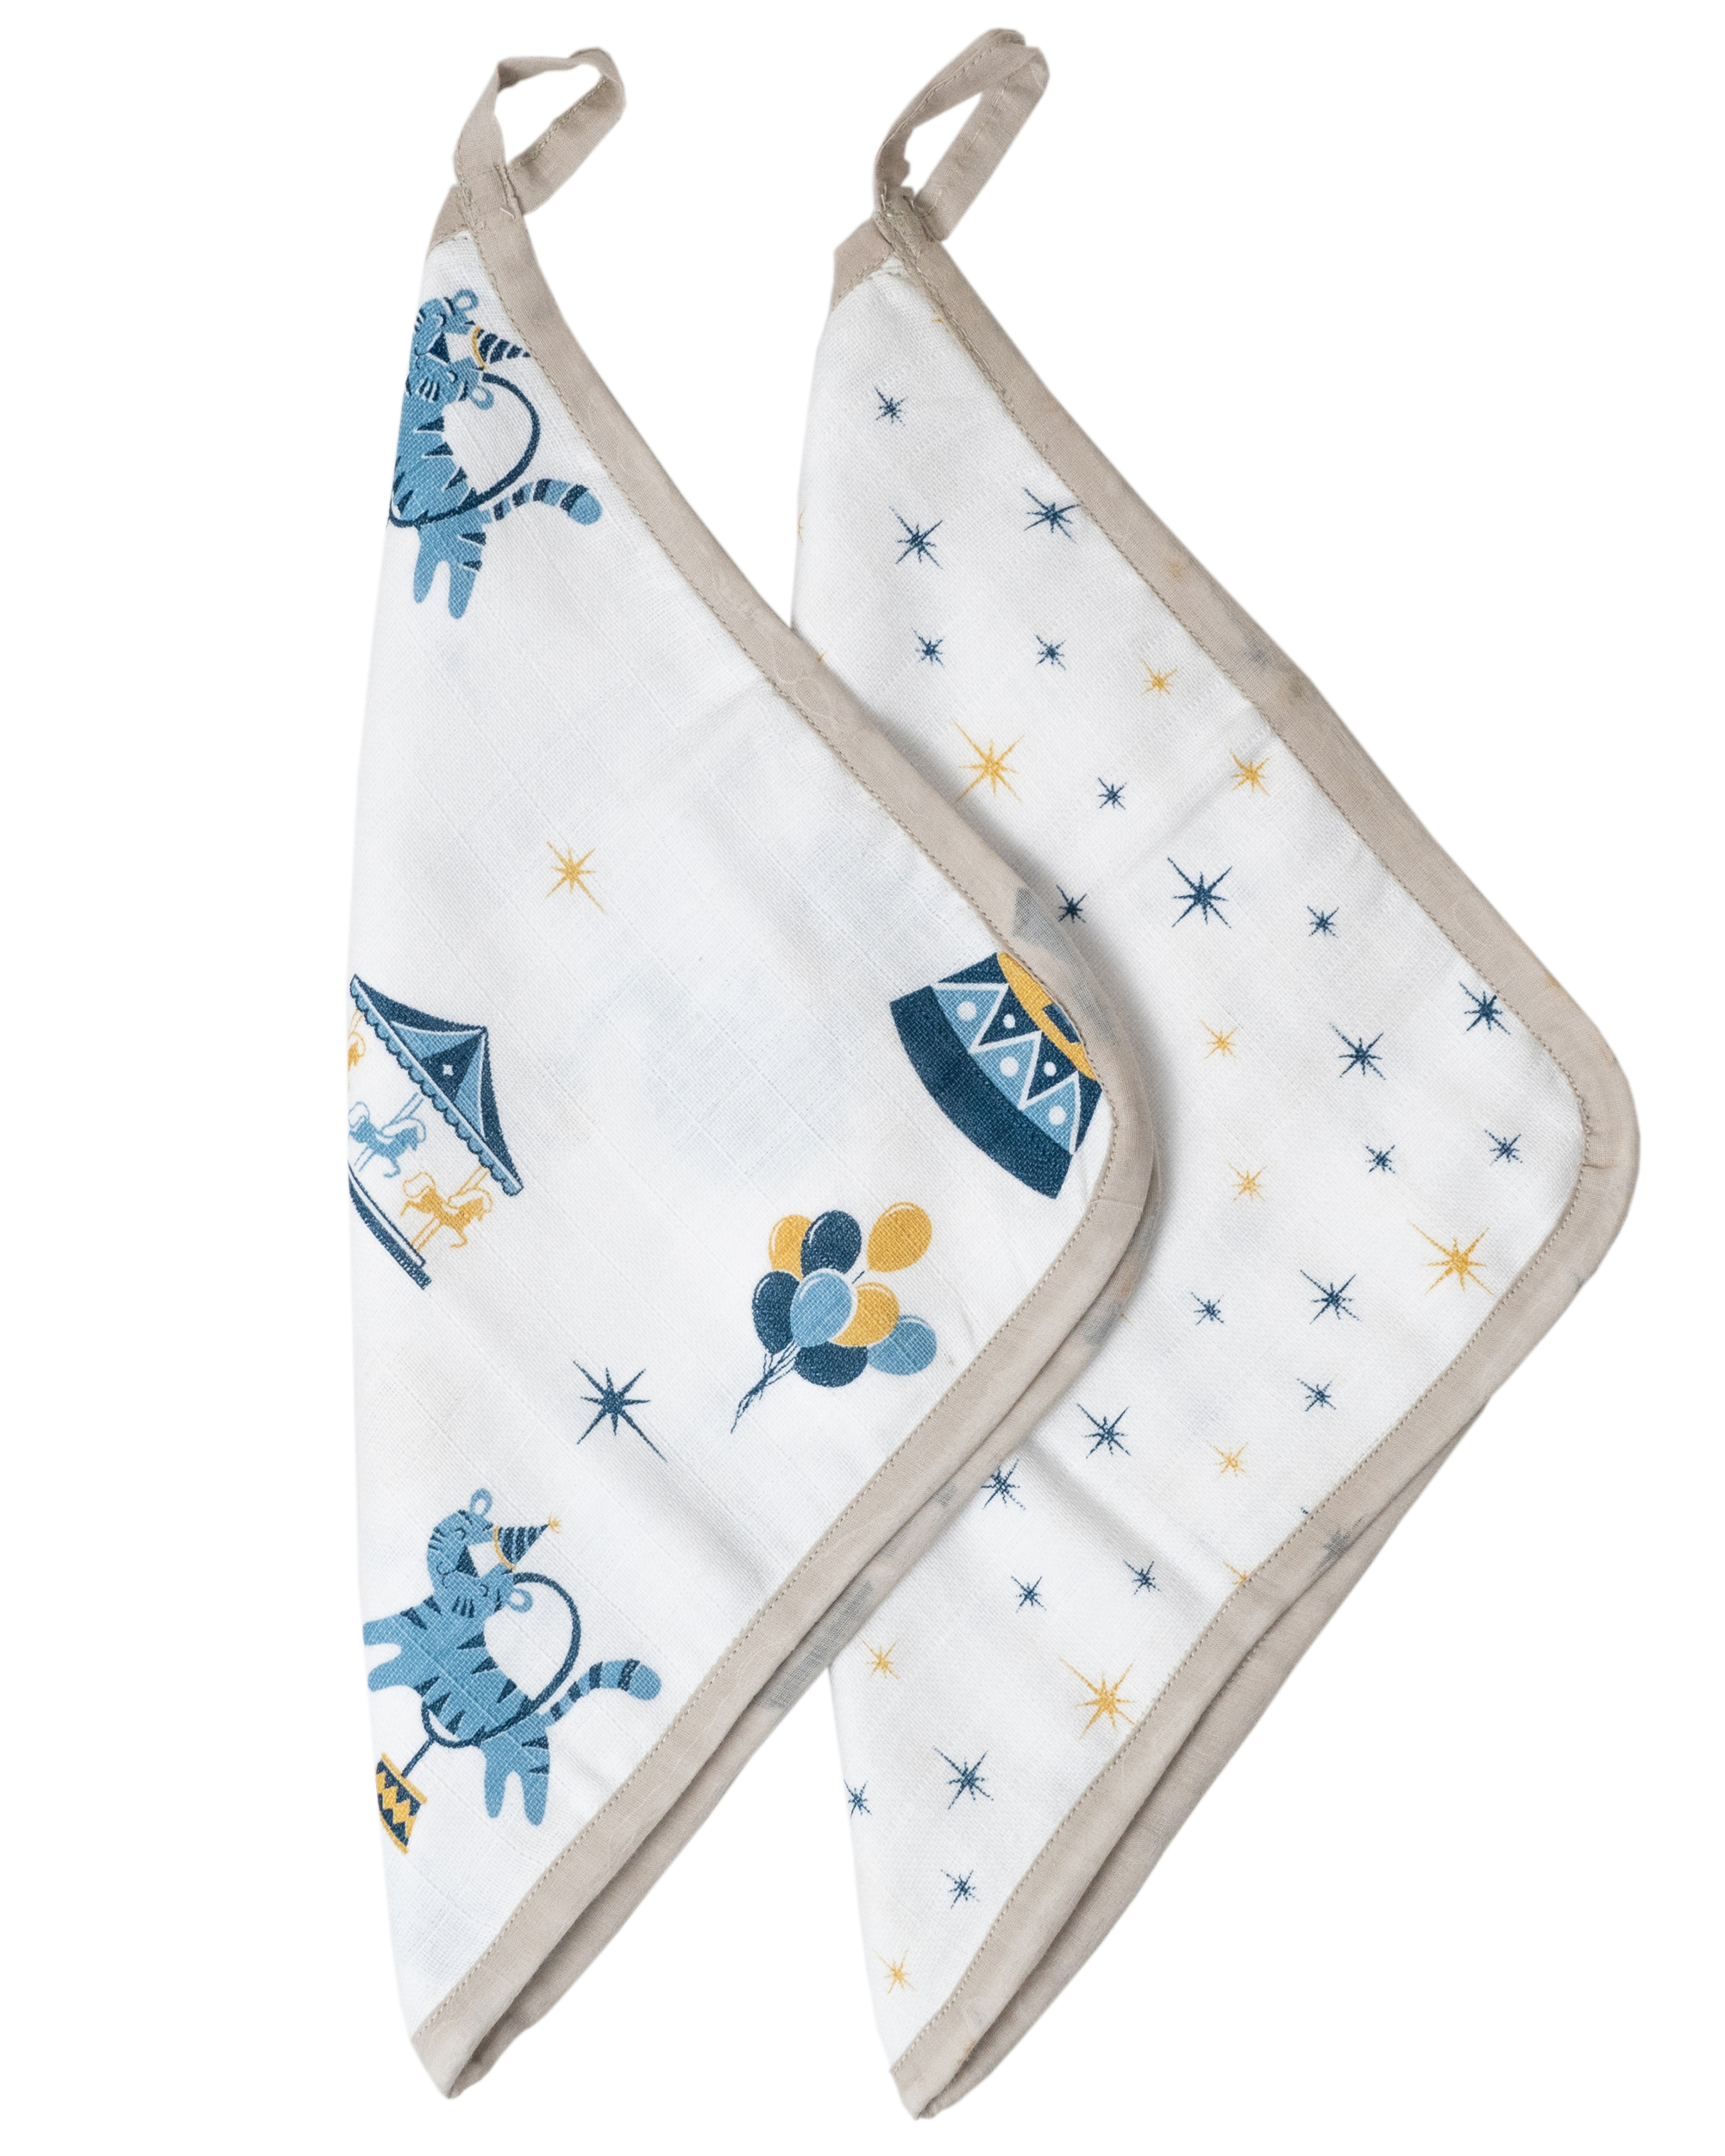 Blue and white  cotton reusable square wipes - set of two